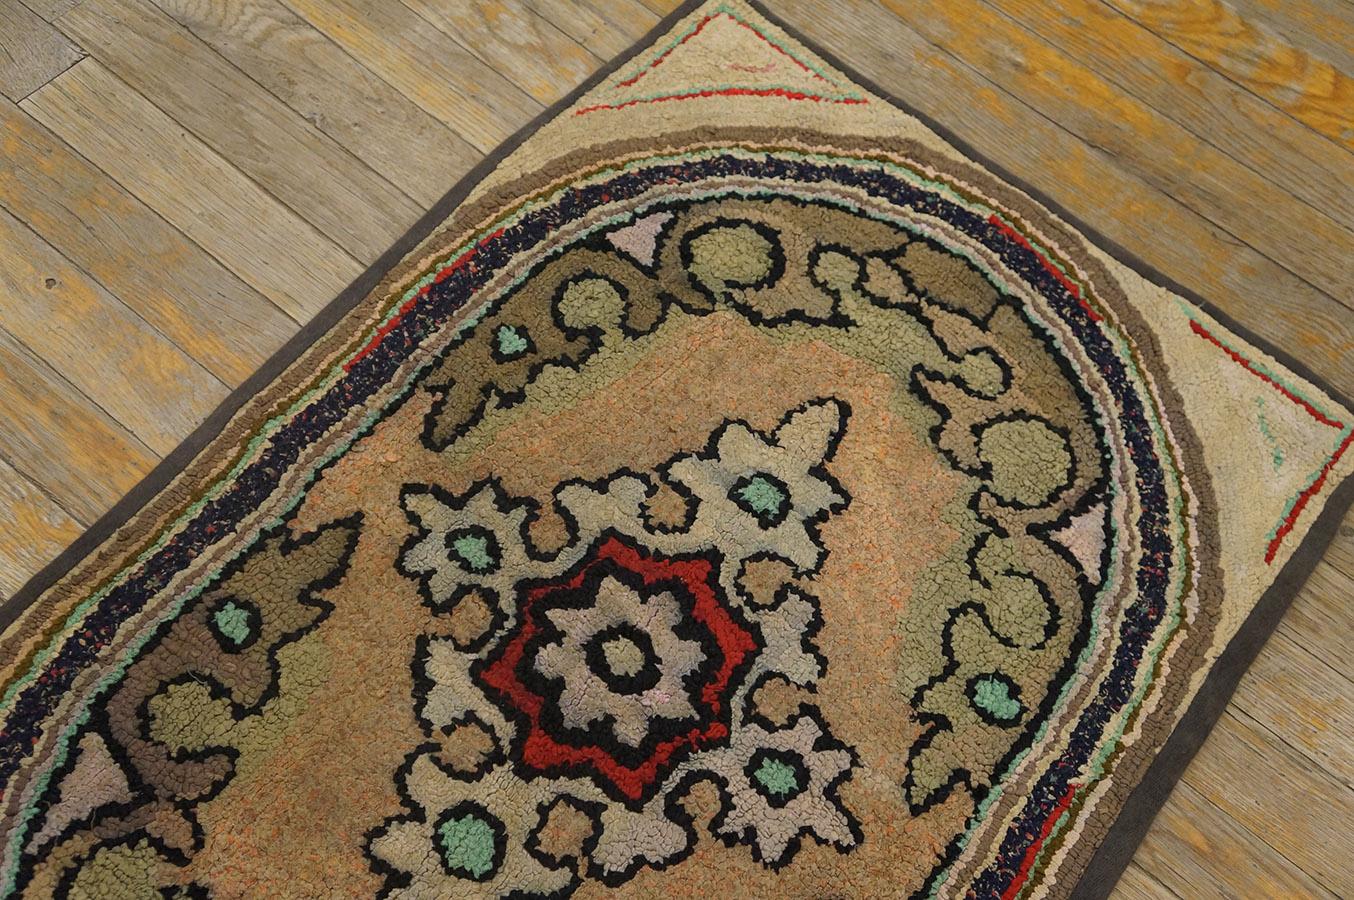 Hand-Woven Antique American Hooked Rug 1'10